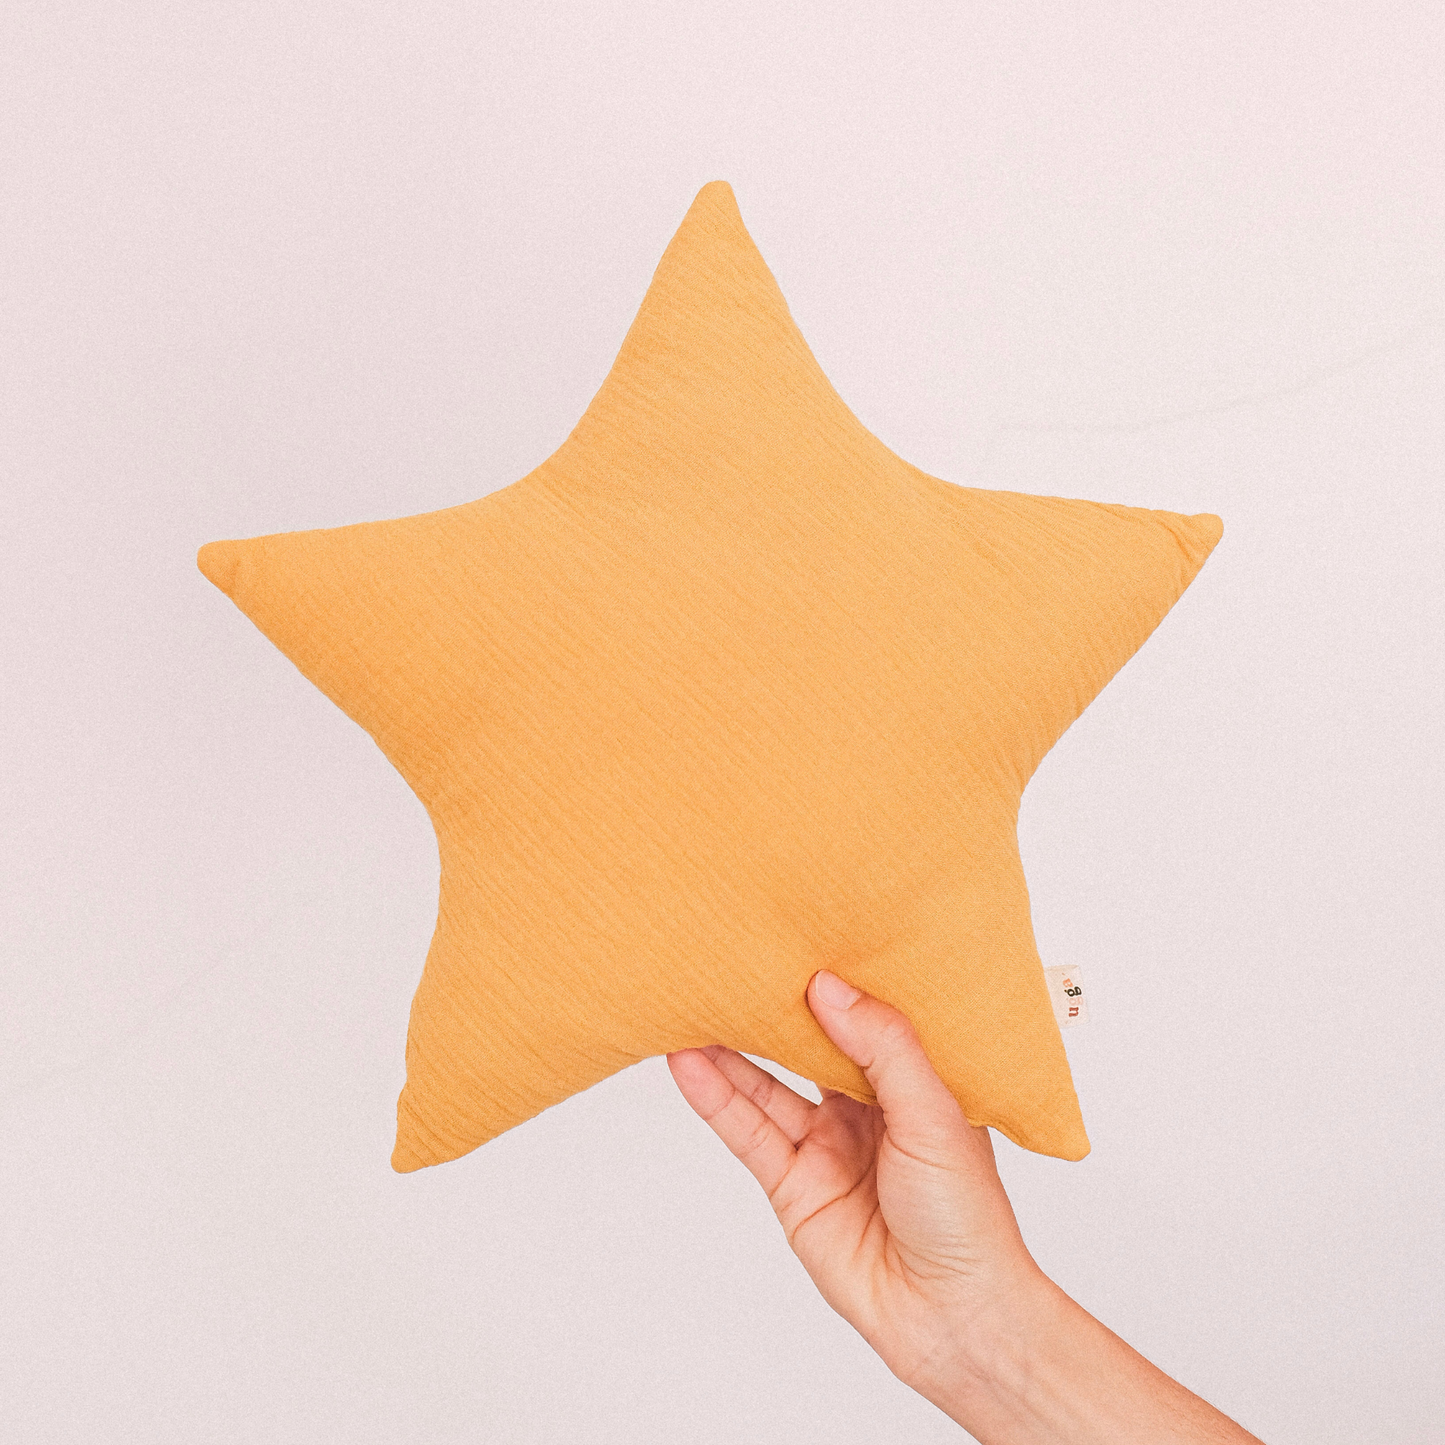 DIY Sewing Pattern and Tutorial - Pillow shaped star - Easy sewing project